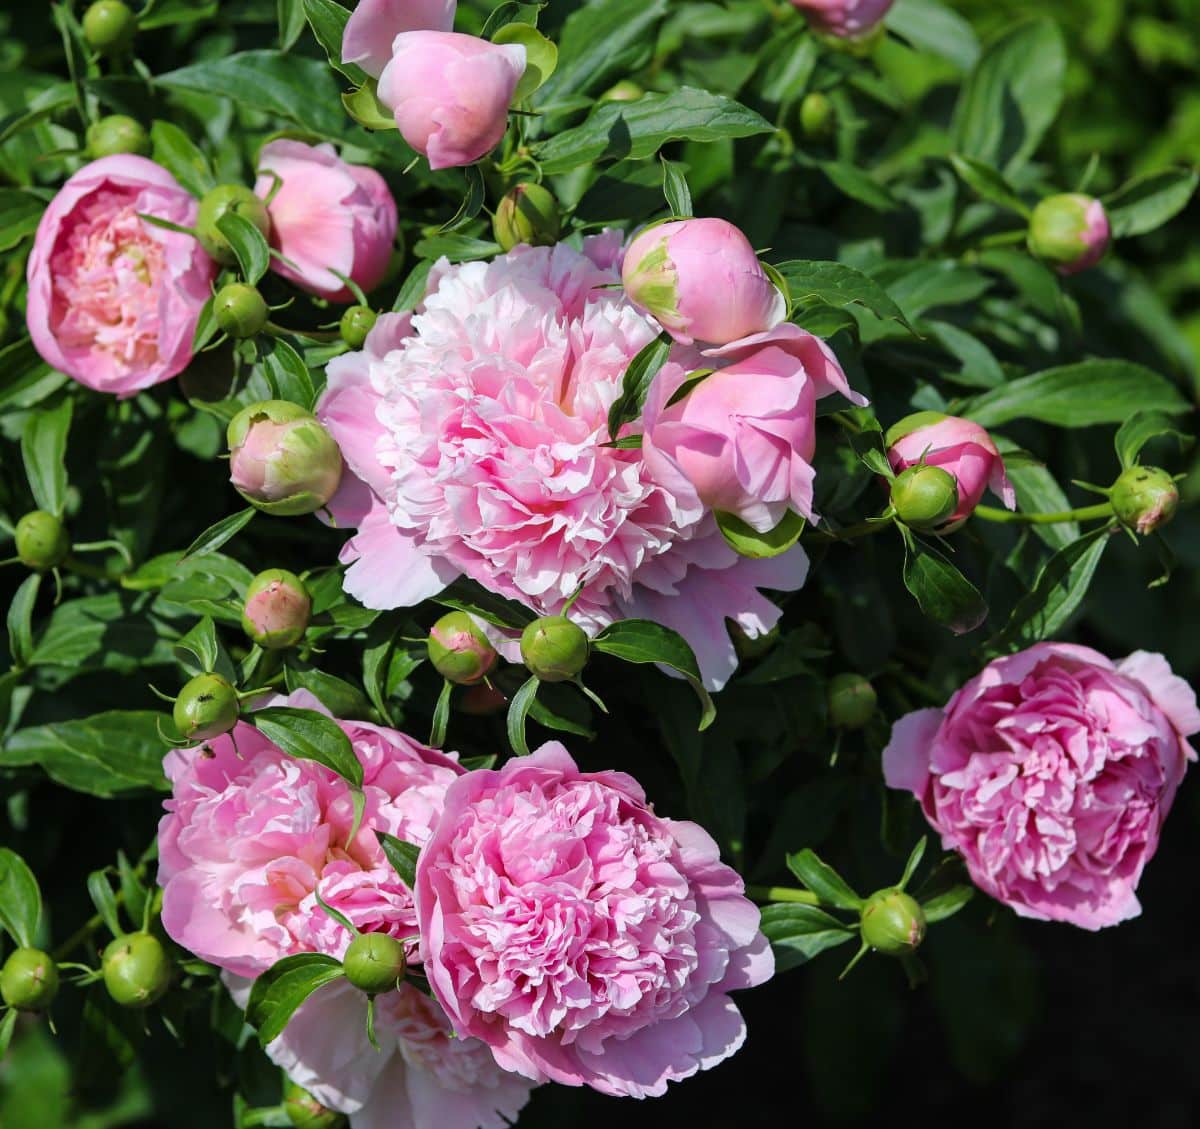 A peony bush in pink bloom.